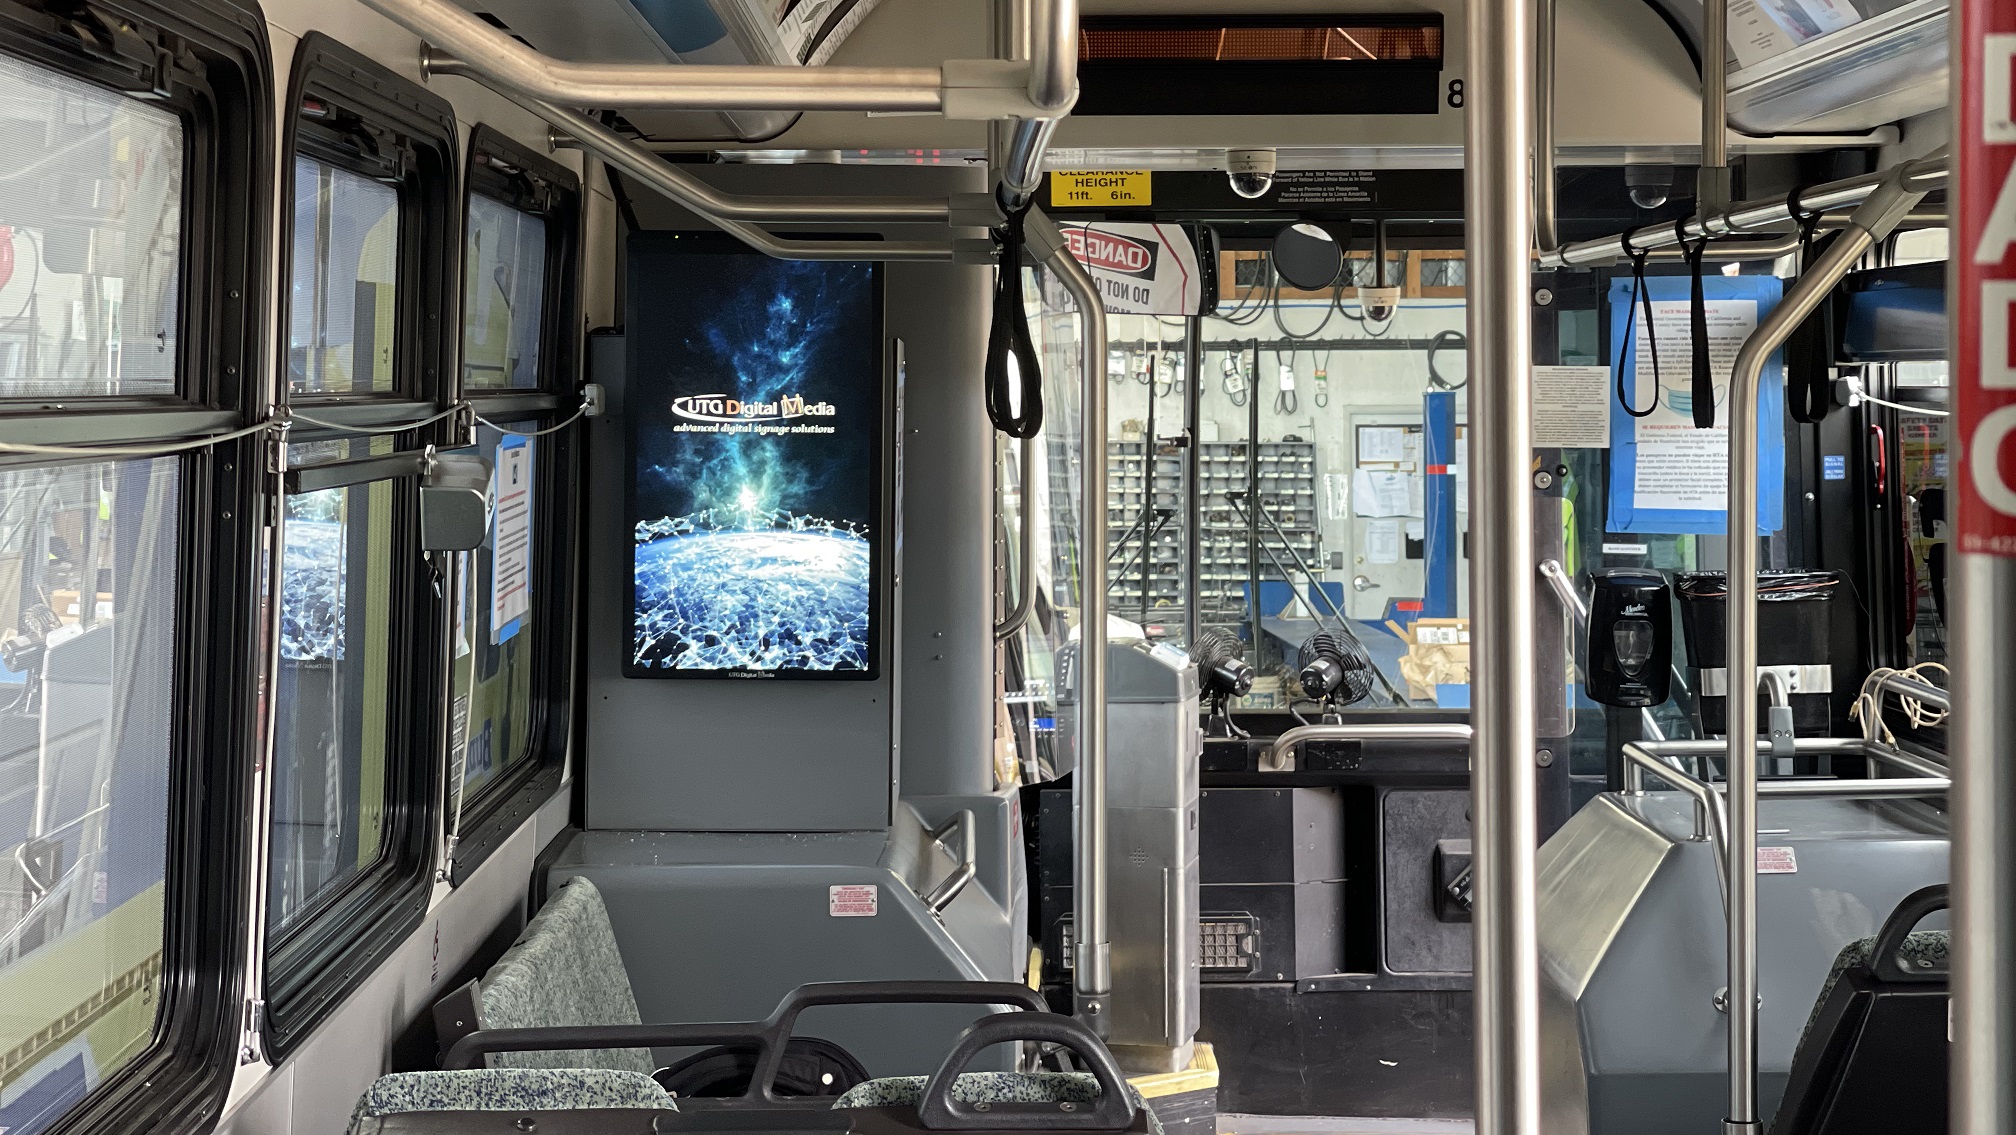 You are currently viewing UTG Digital Media, a Canadian leader in digital signage solutions, provides digital displays for transit vehicles on Humboldt Transit Authority (HTA) buses in California